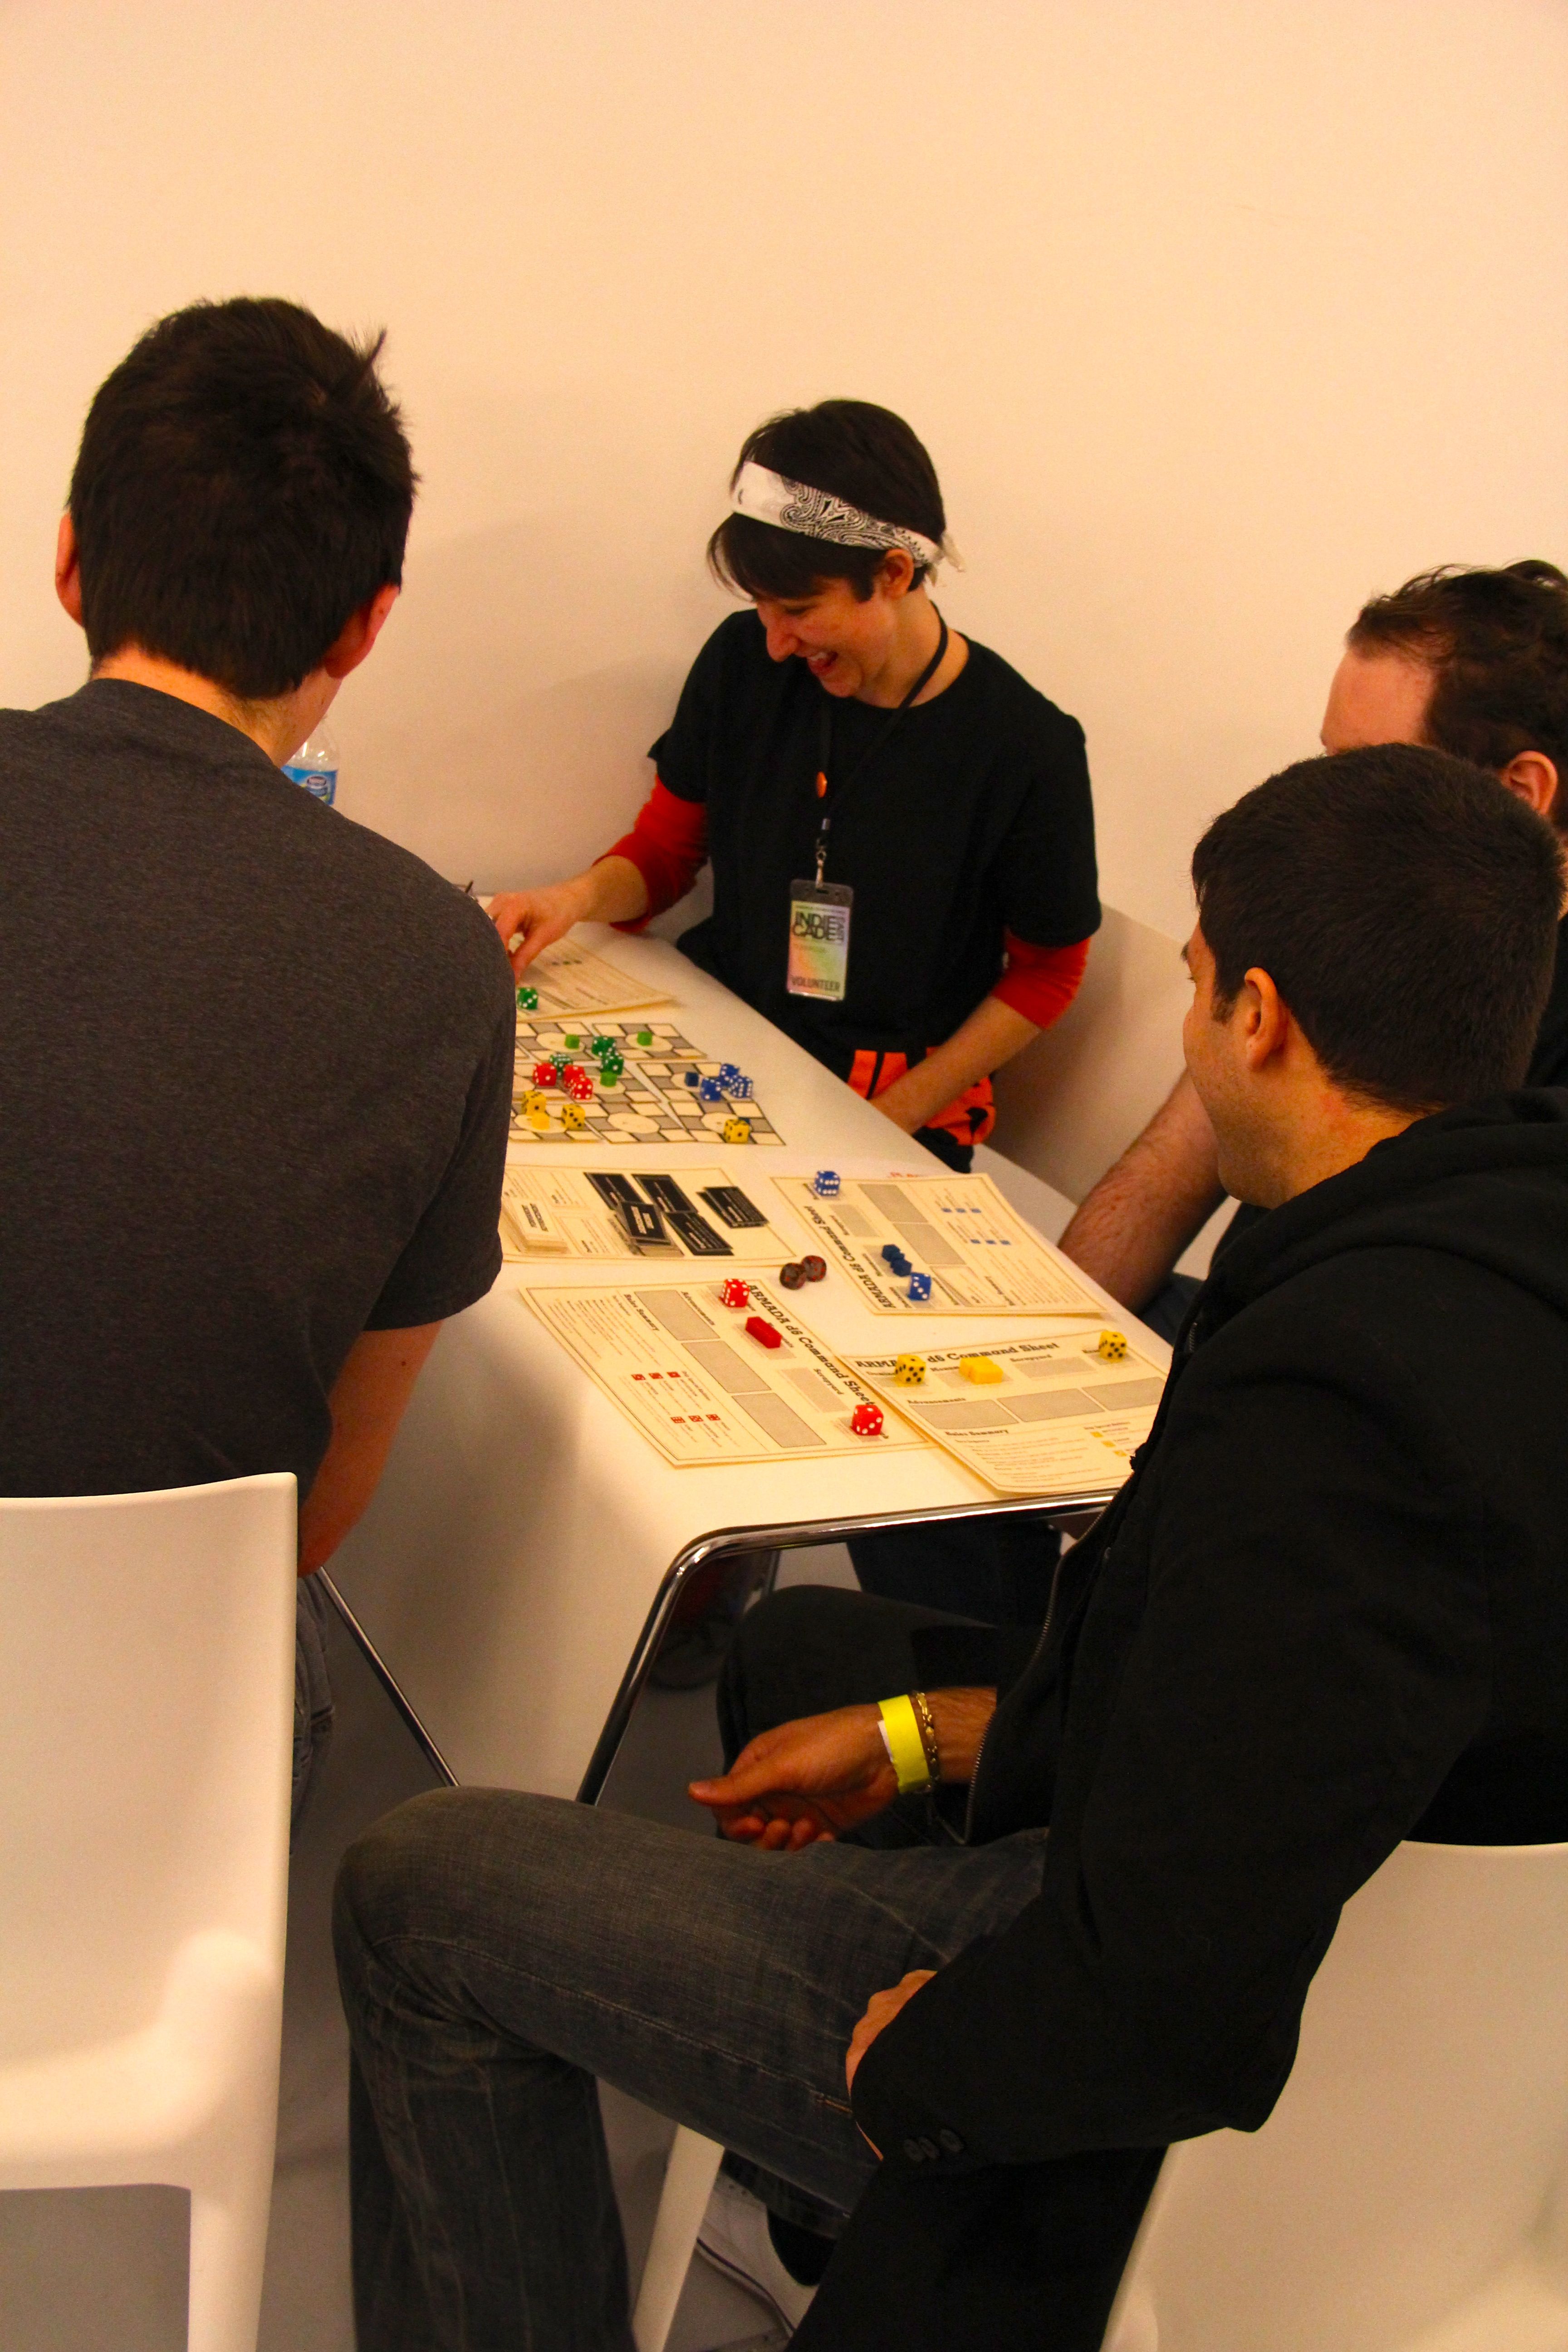 A game of Armada D6 (board game developed by John Sharp and Eric Zimmerman) in action at IndieCade East!